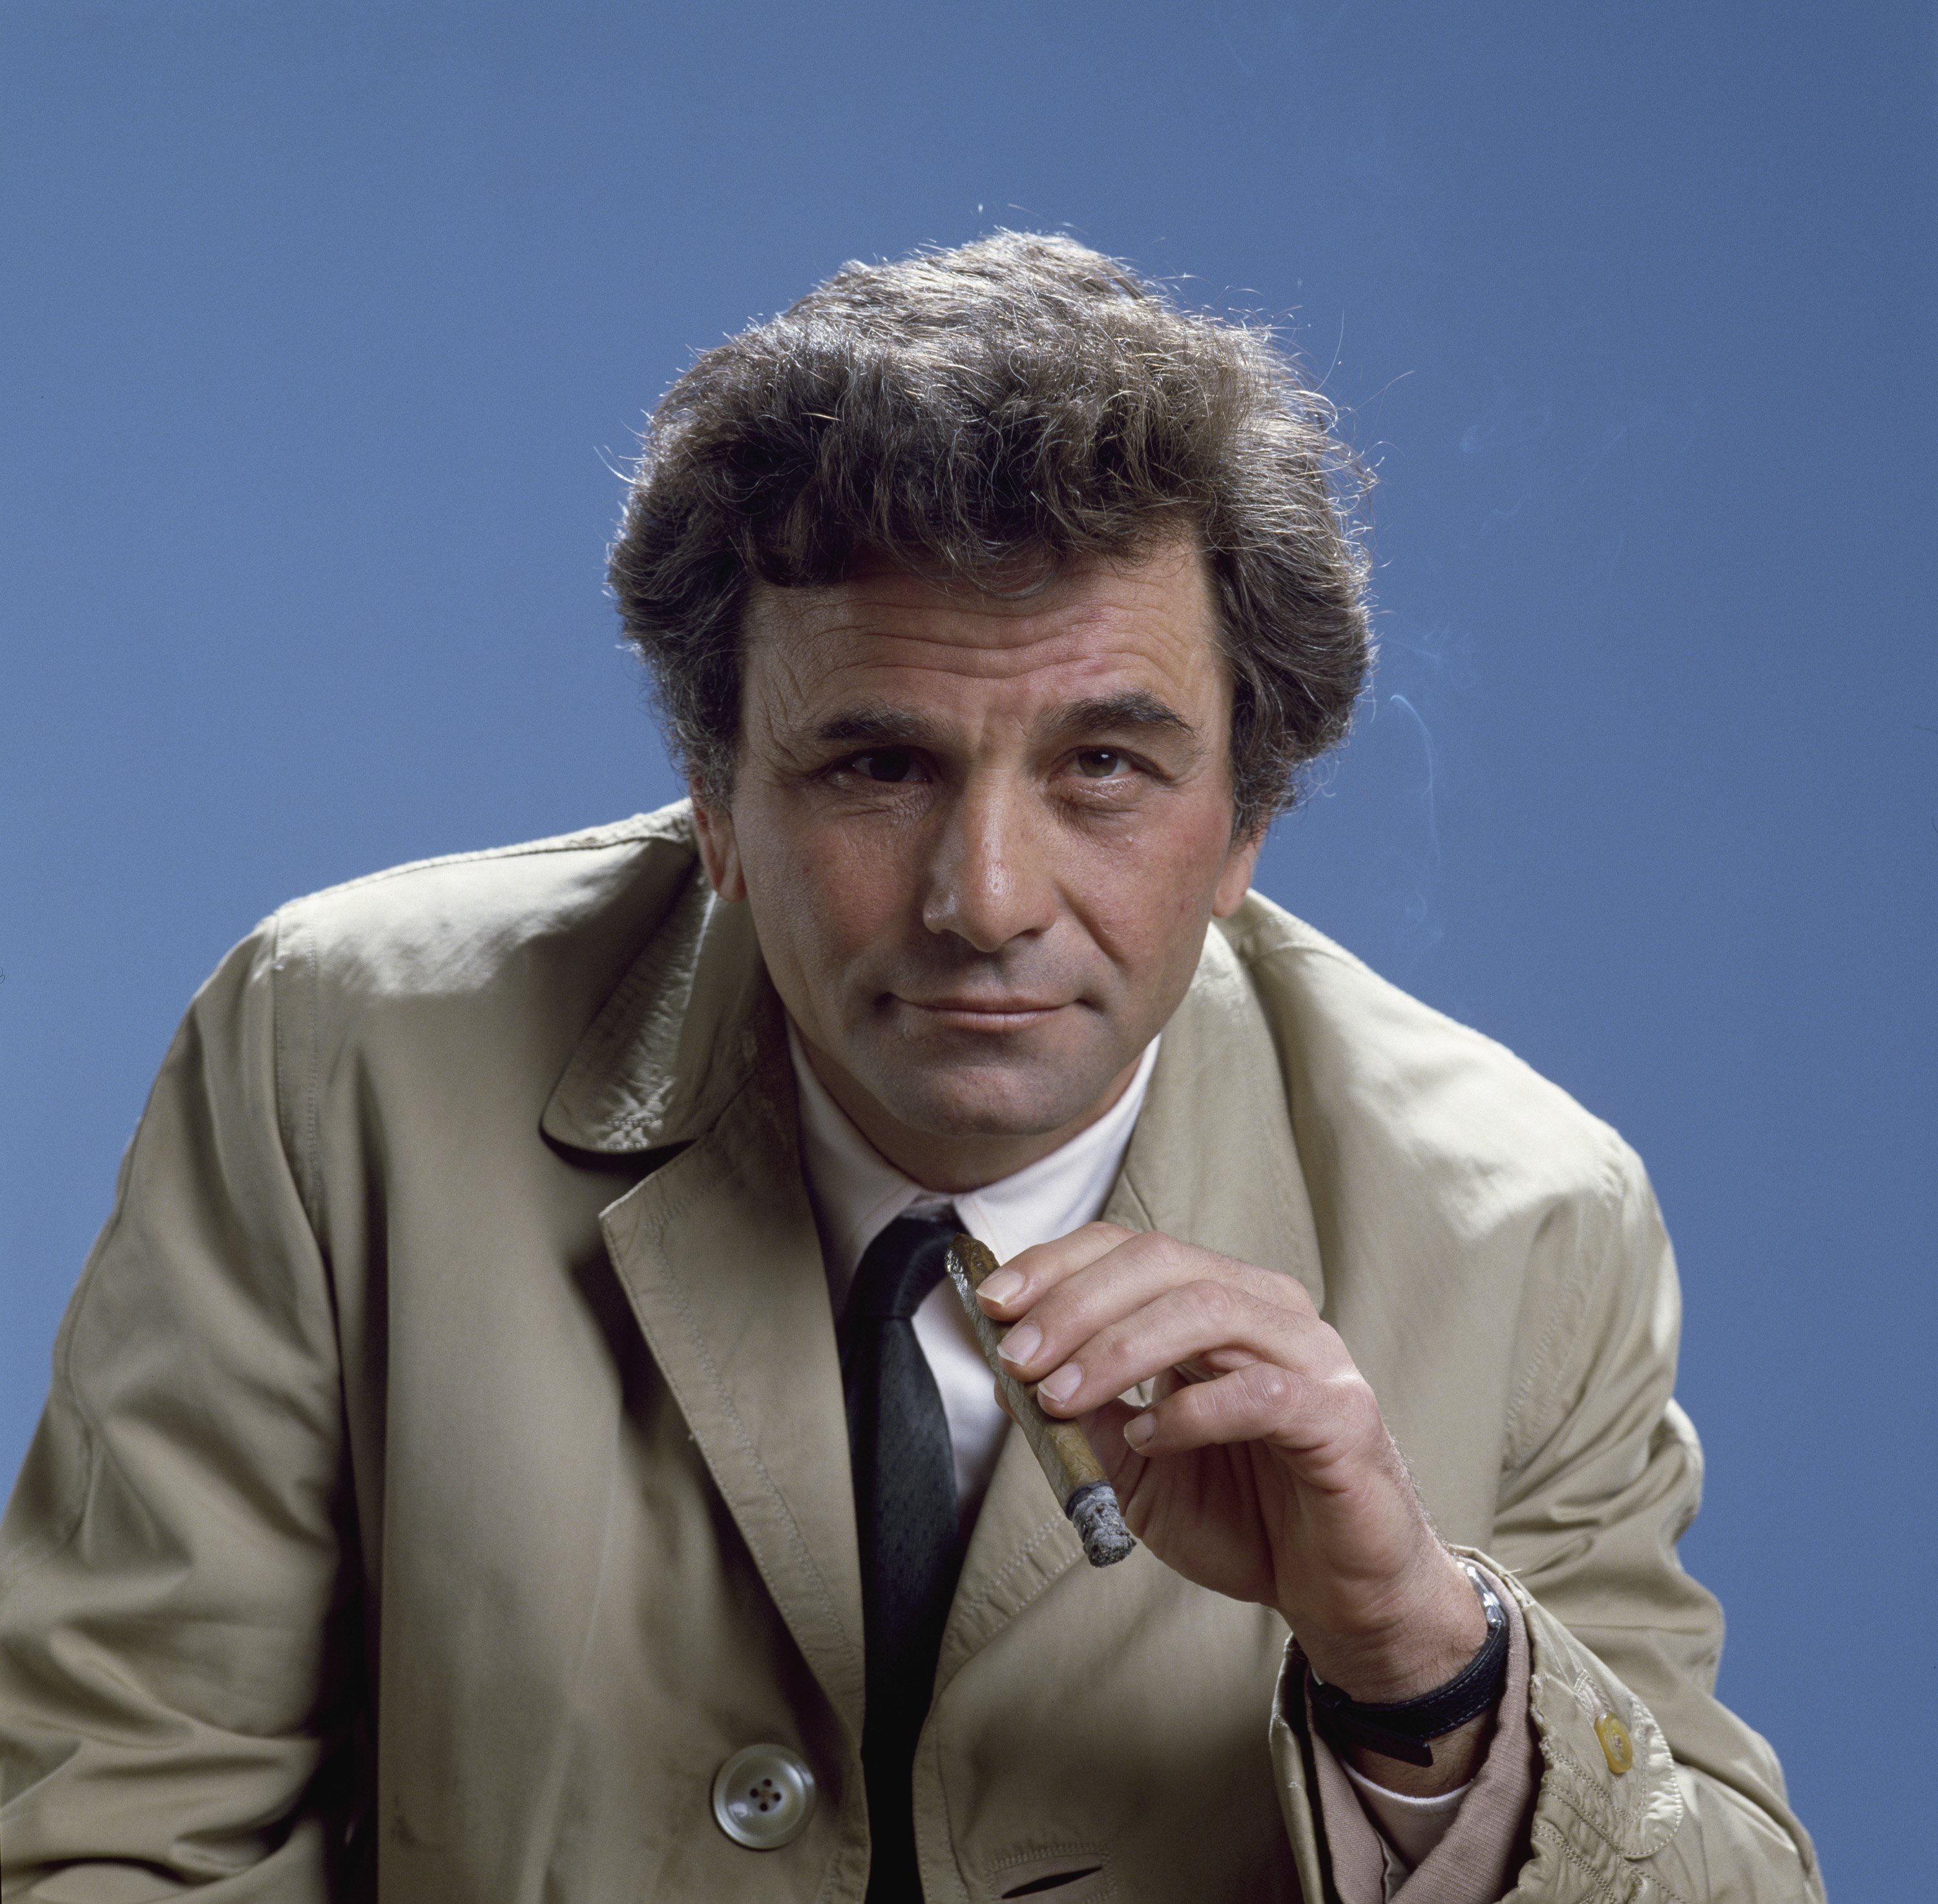 Actor Peter Falk dressed in character as Lt. Columbo on 'Columbo'